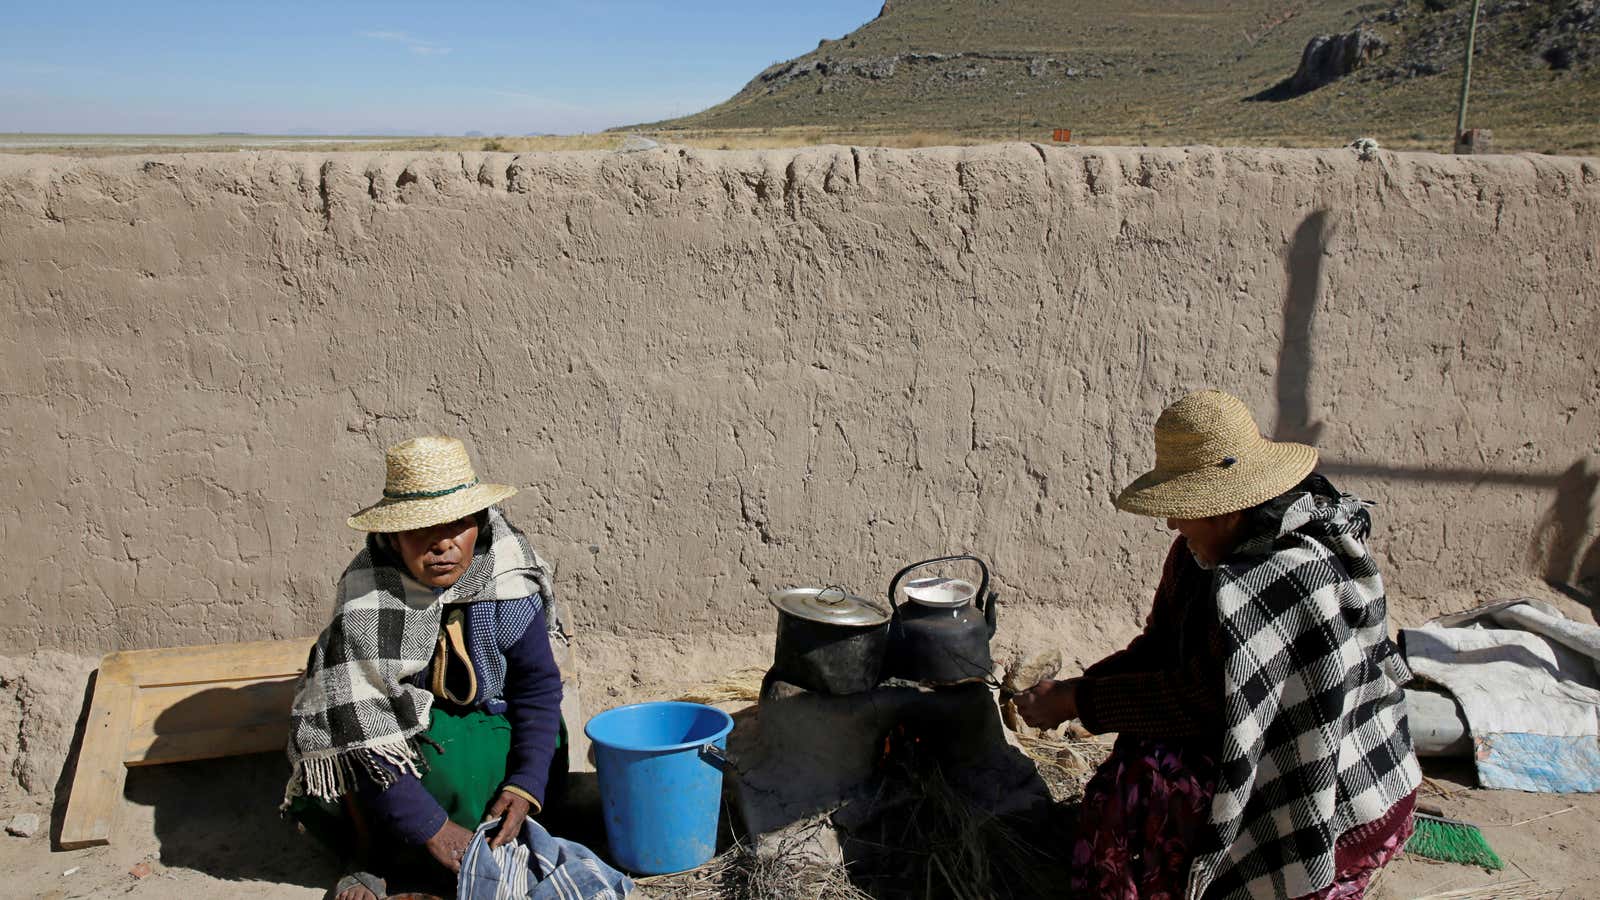 Urus Muratos women cook in Punaca on the shores of the dried lake Poopo affected by climate change in the Oruro Department, Bolivia.